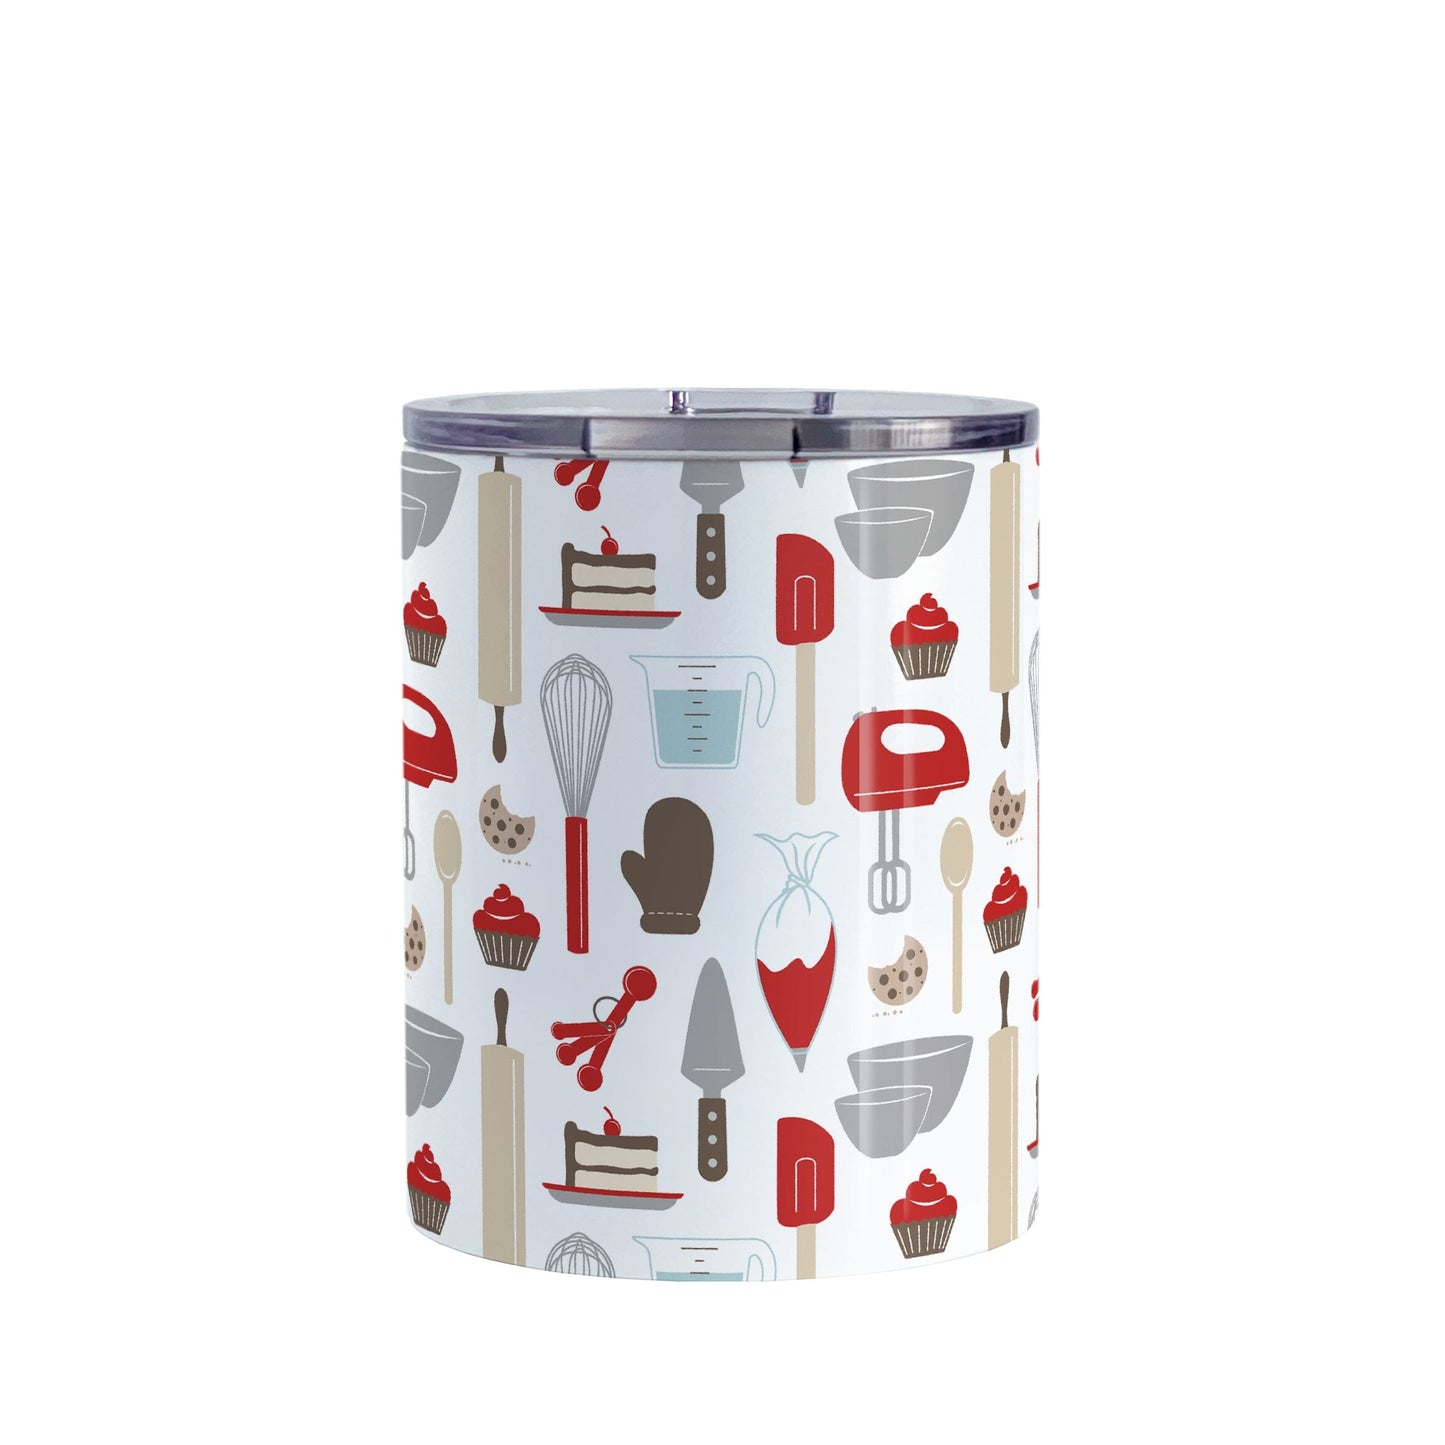 Red Baking Pattern Tumbler Cup (10oz) at Amy's Coffee Mugs. A stainless steel tumbler cup designed with a pattern of baking tools like spatulas, whisks, mixers, bowls, and spoons, with cookies, cupcakes, and cake all in a red, gray, brown, and beige color scheme that wraps around the cup. 